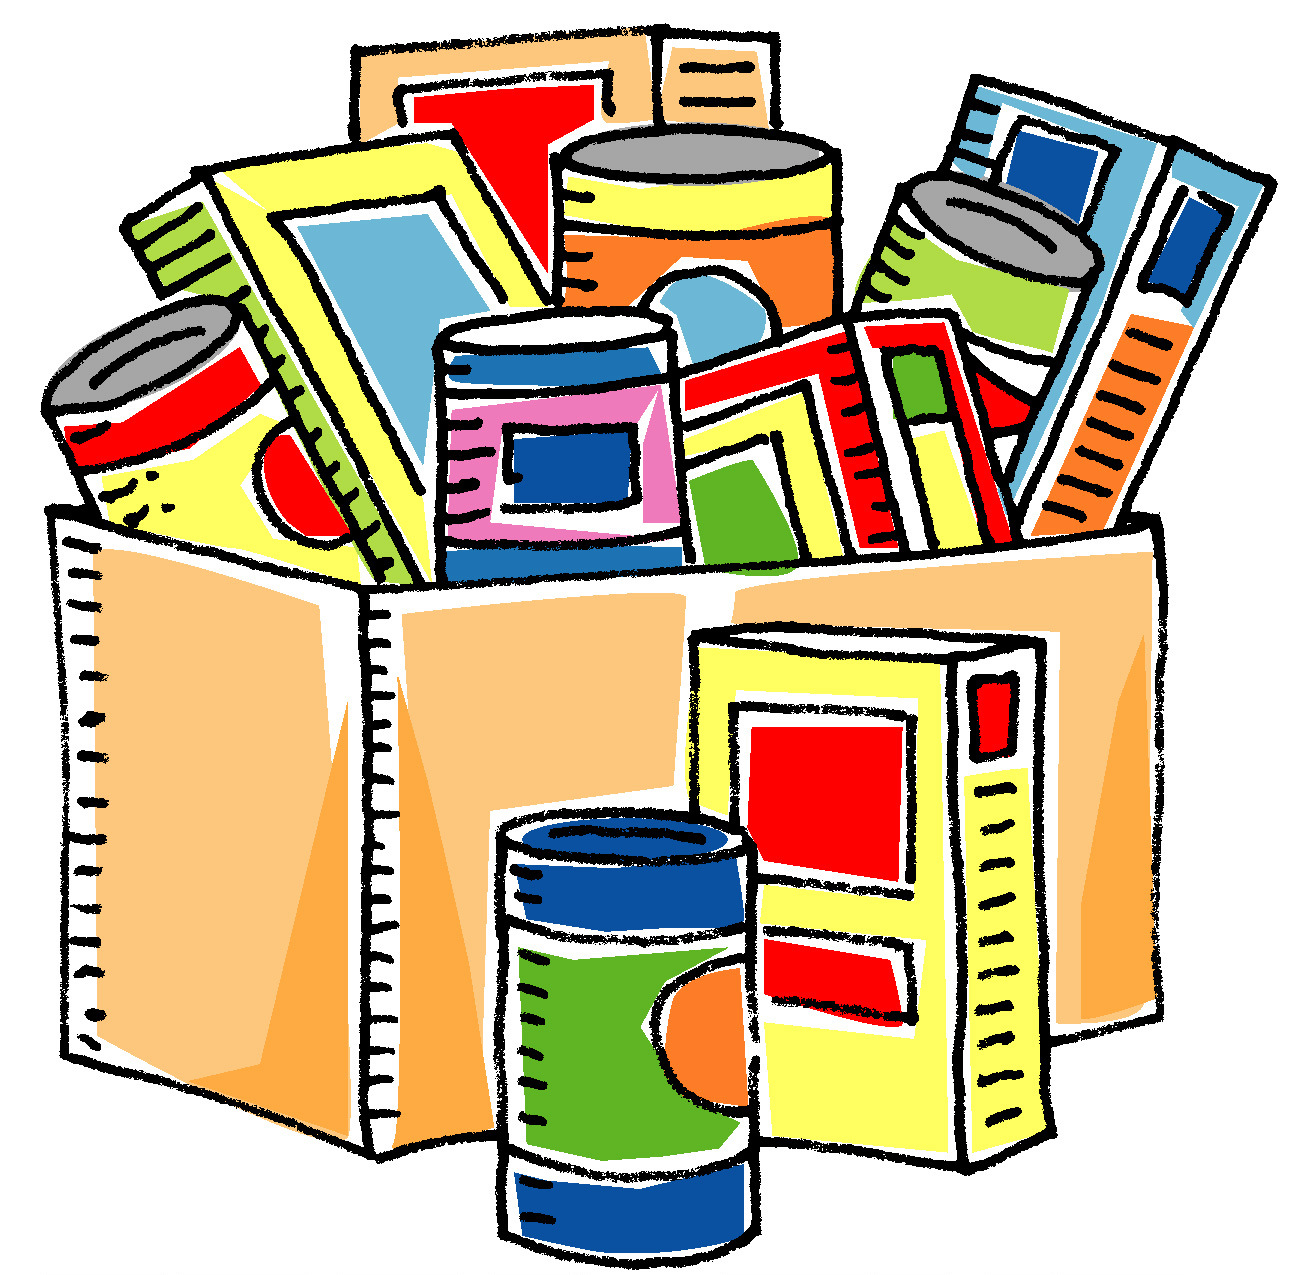 Free Food Pantry Clipart, Download Free Clip Art, Free Clip